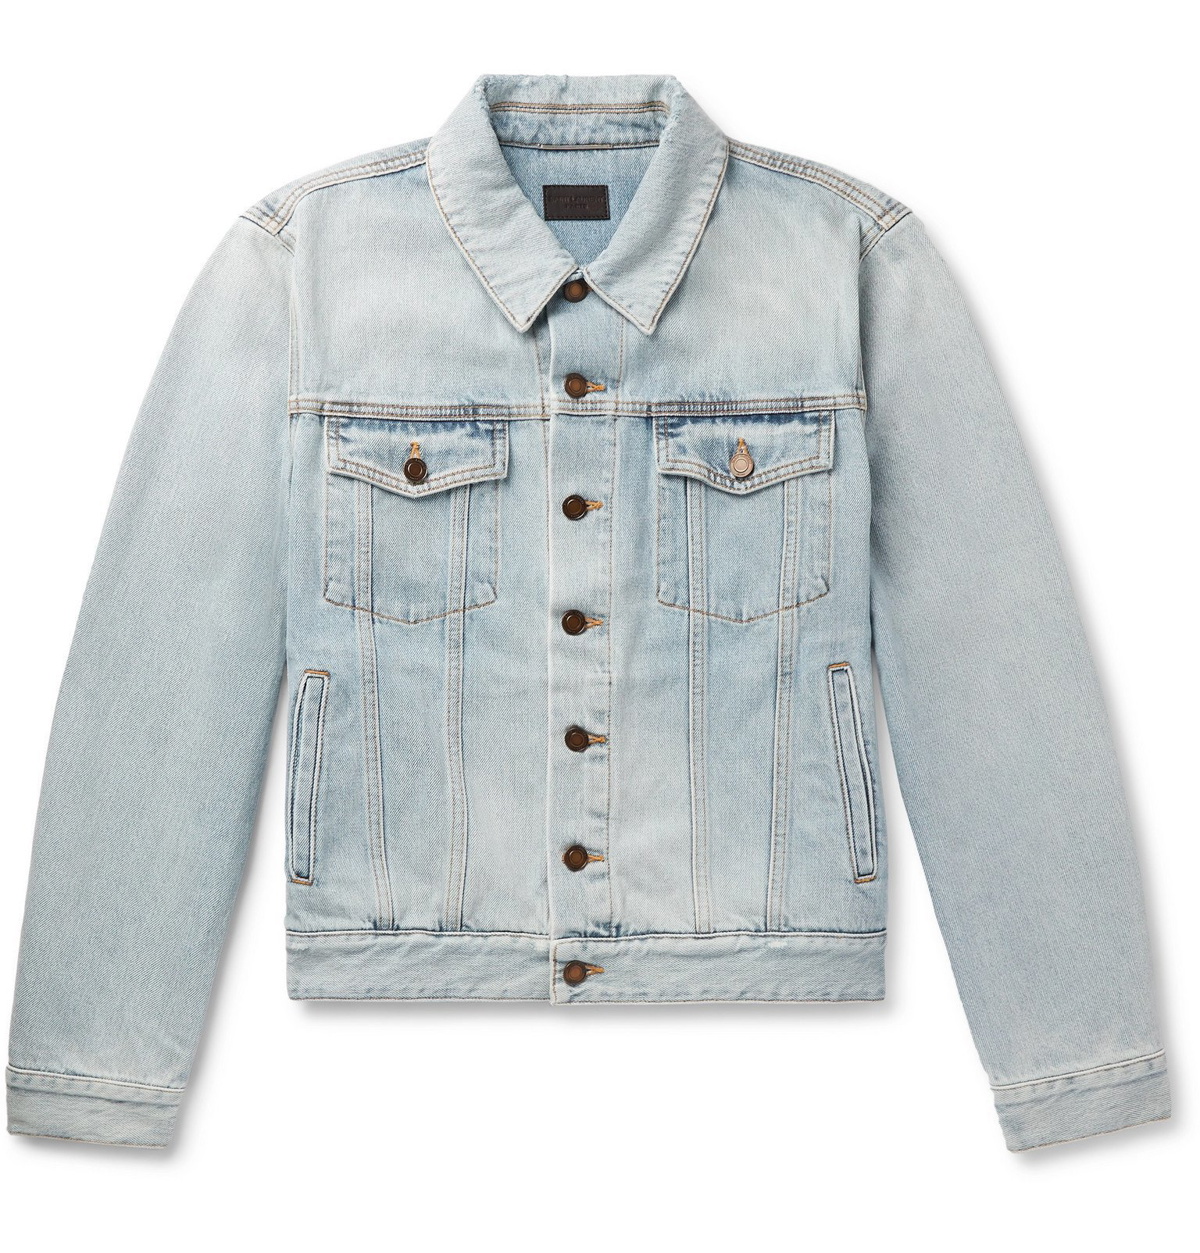 Blue Denim Jacket with St. Jude Patch - St. Jude Gift Shop